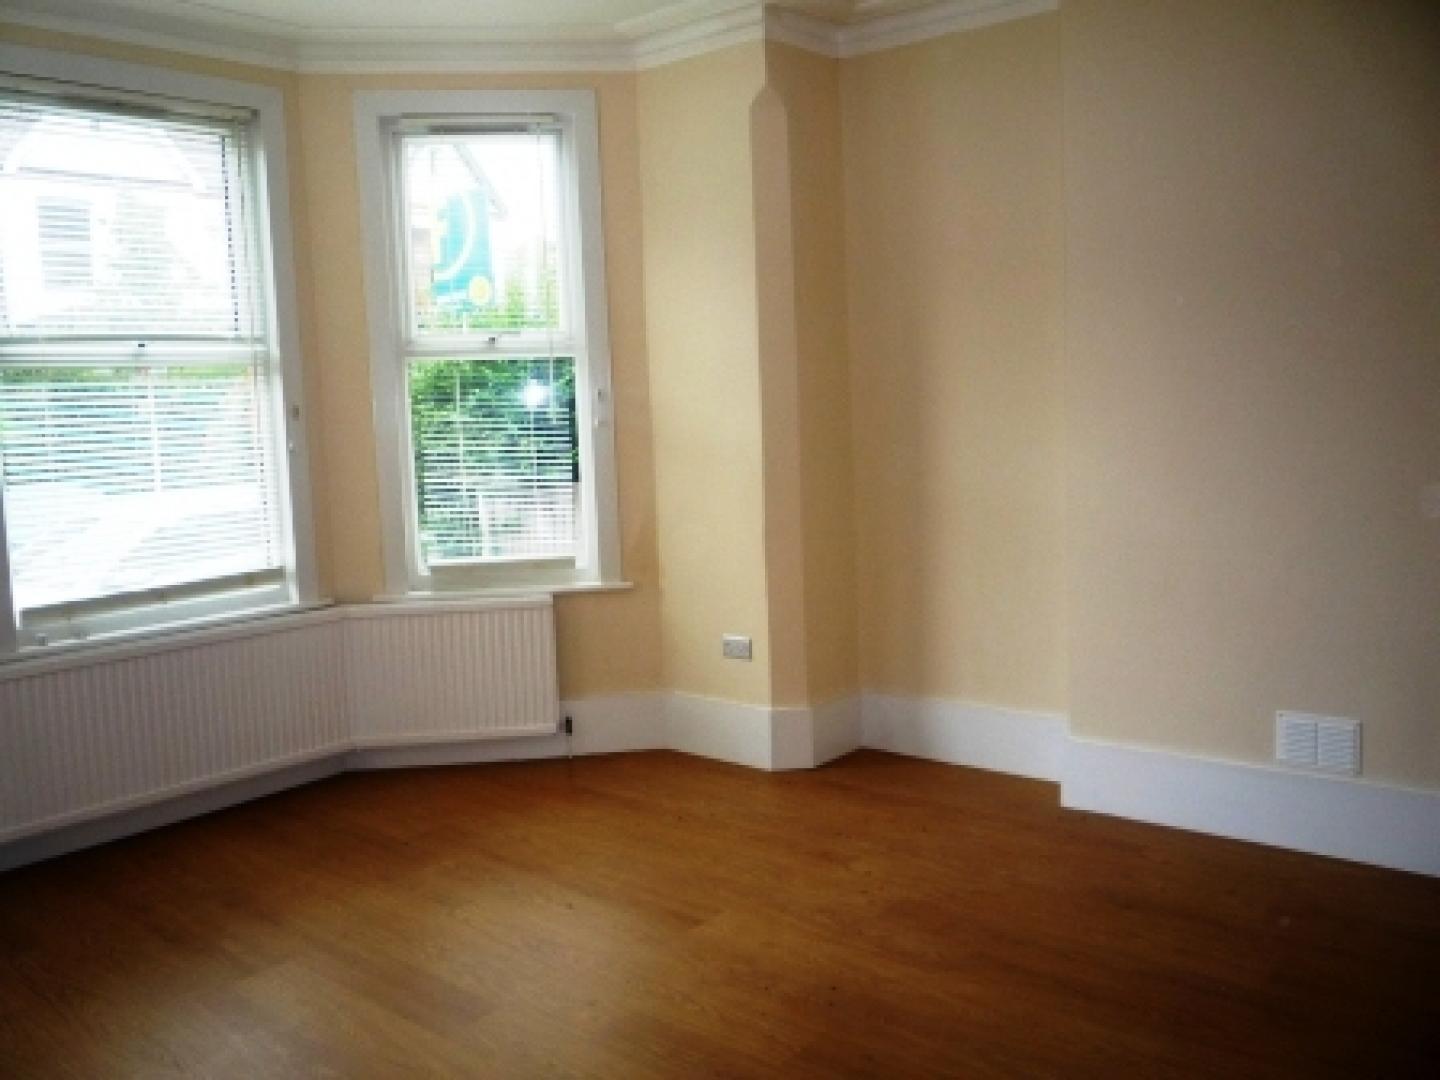 			Fortismere Catchement, 4 Bedroom, 1 bath, 1 reception House			 Greenham Road, MUSWELL HILL